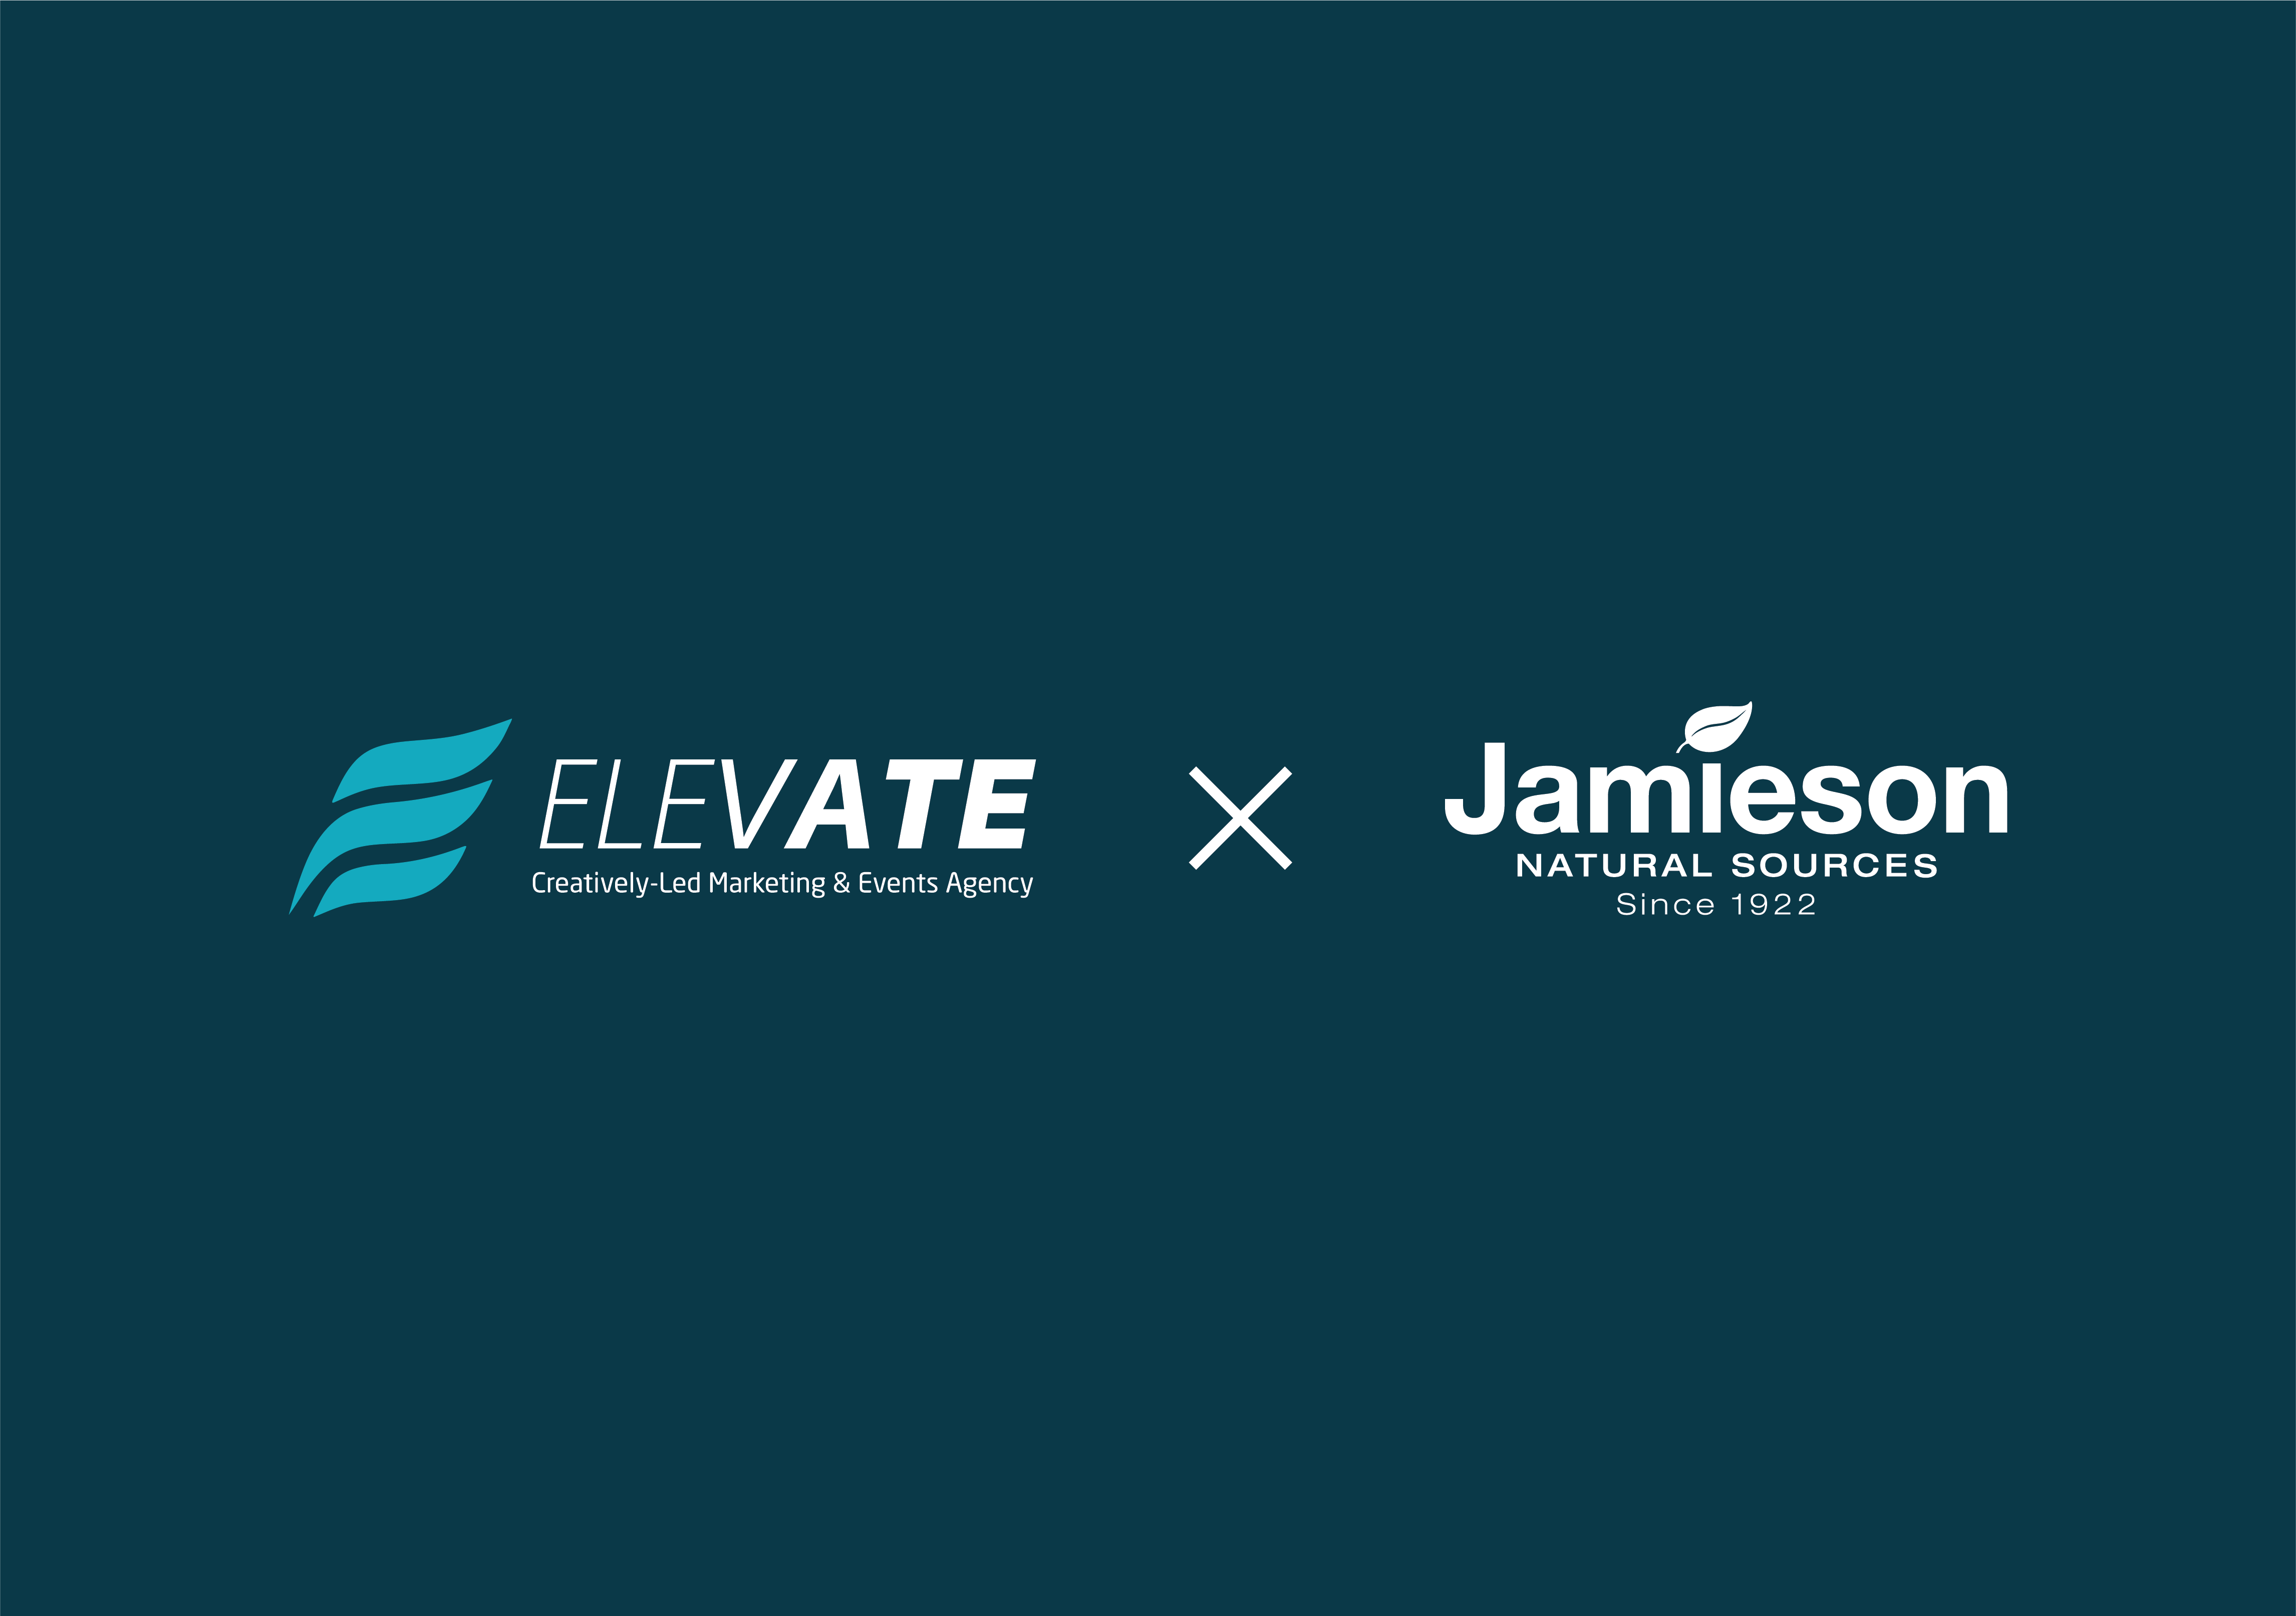 Jamieson by Cezar Health appoints Elevate as its creative and media agency